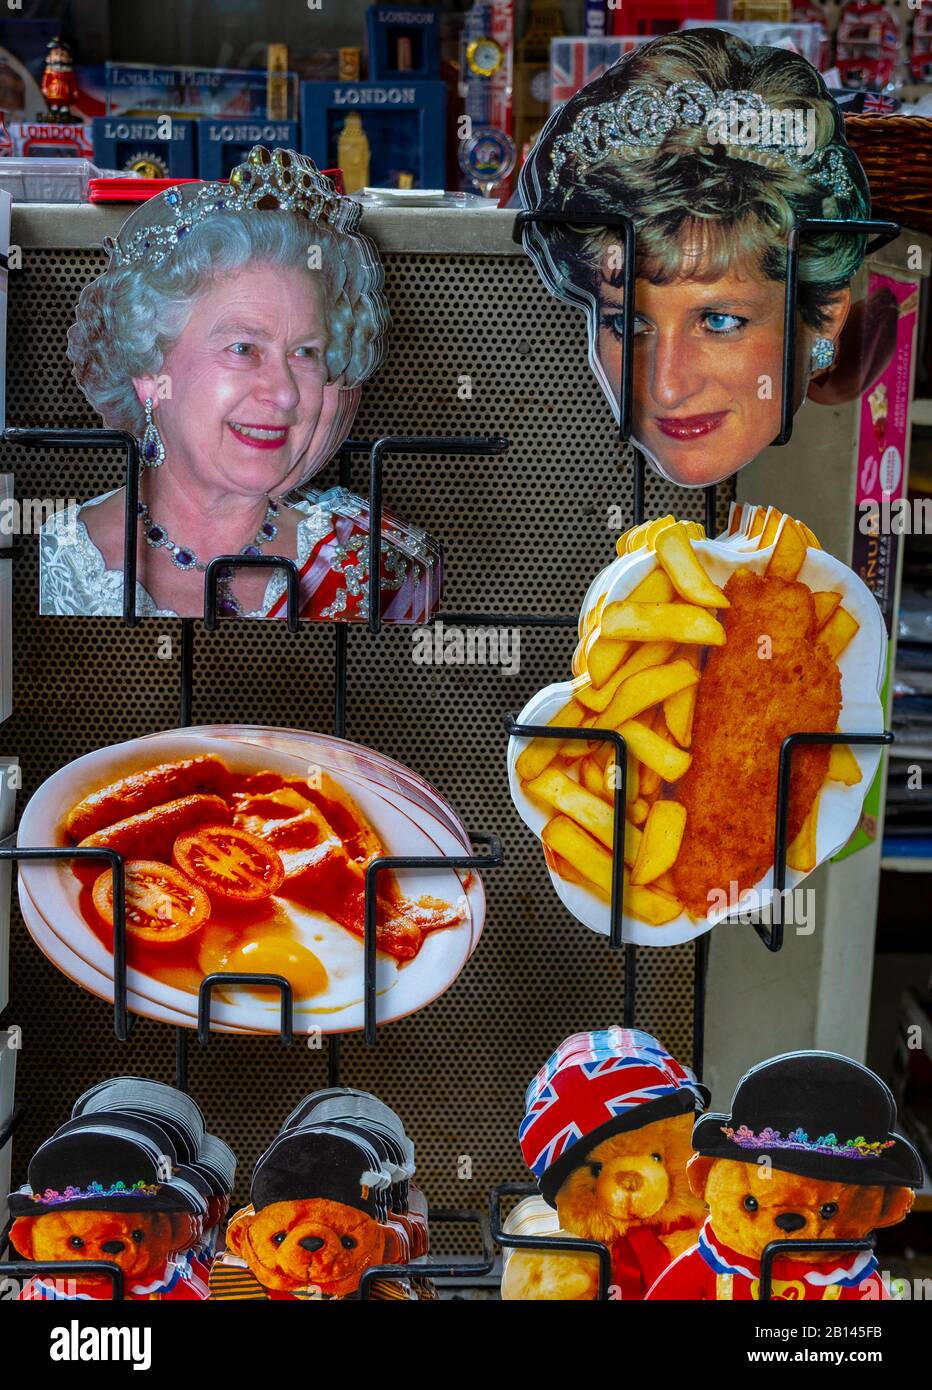 Shape Postcards, Lady Di, Queen Elizabeth, Fish and Chips, English Breakfast, Souvenirs, London Stockfoto